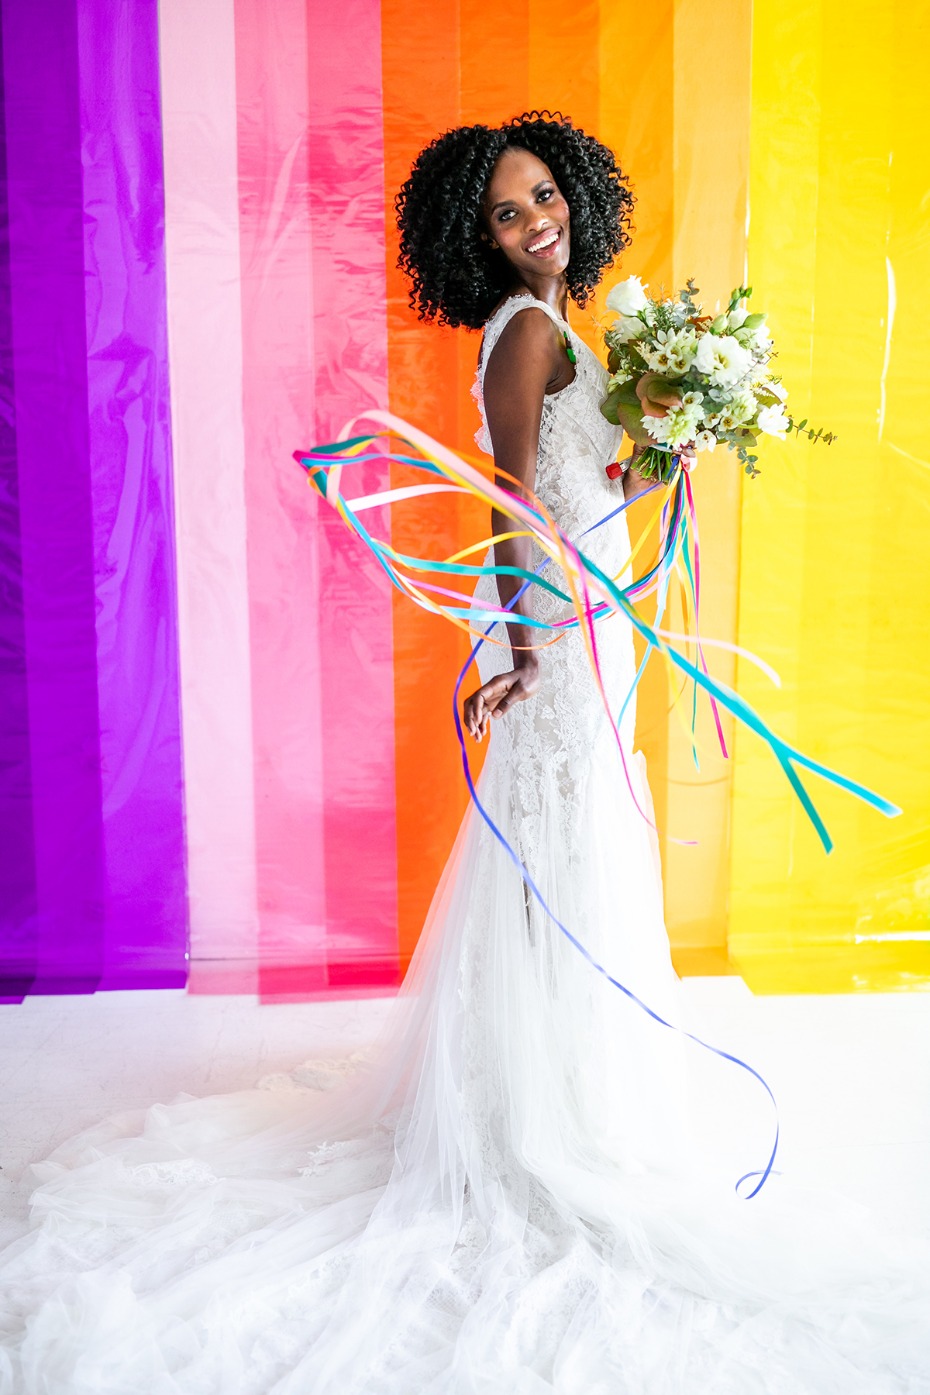 rainbow ribbons for your wedding bouquet